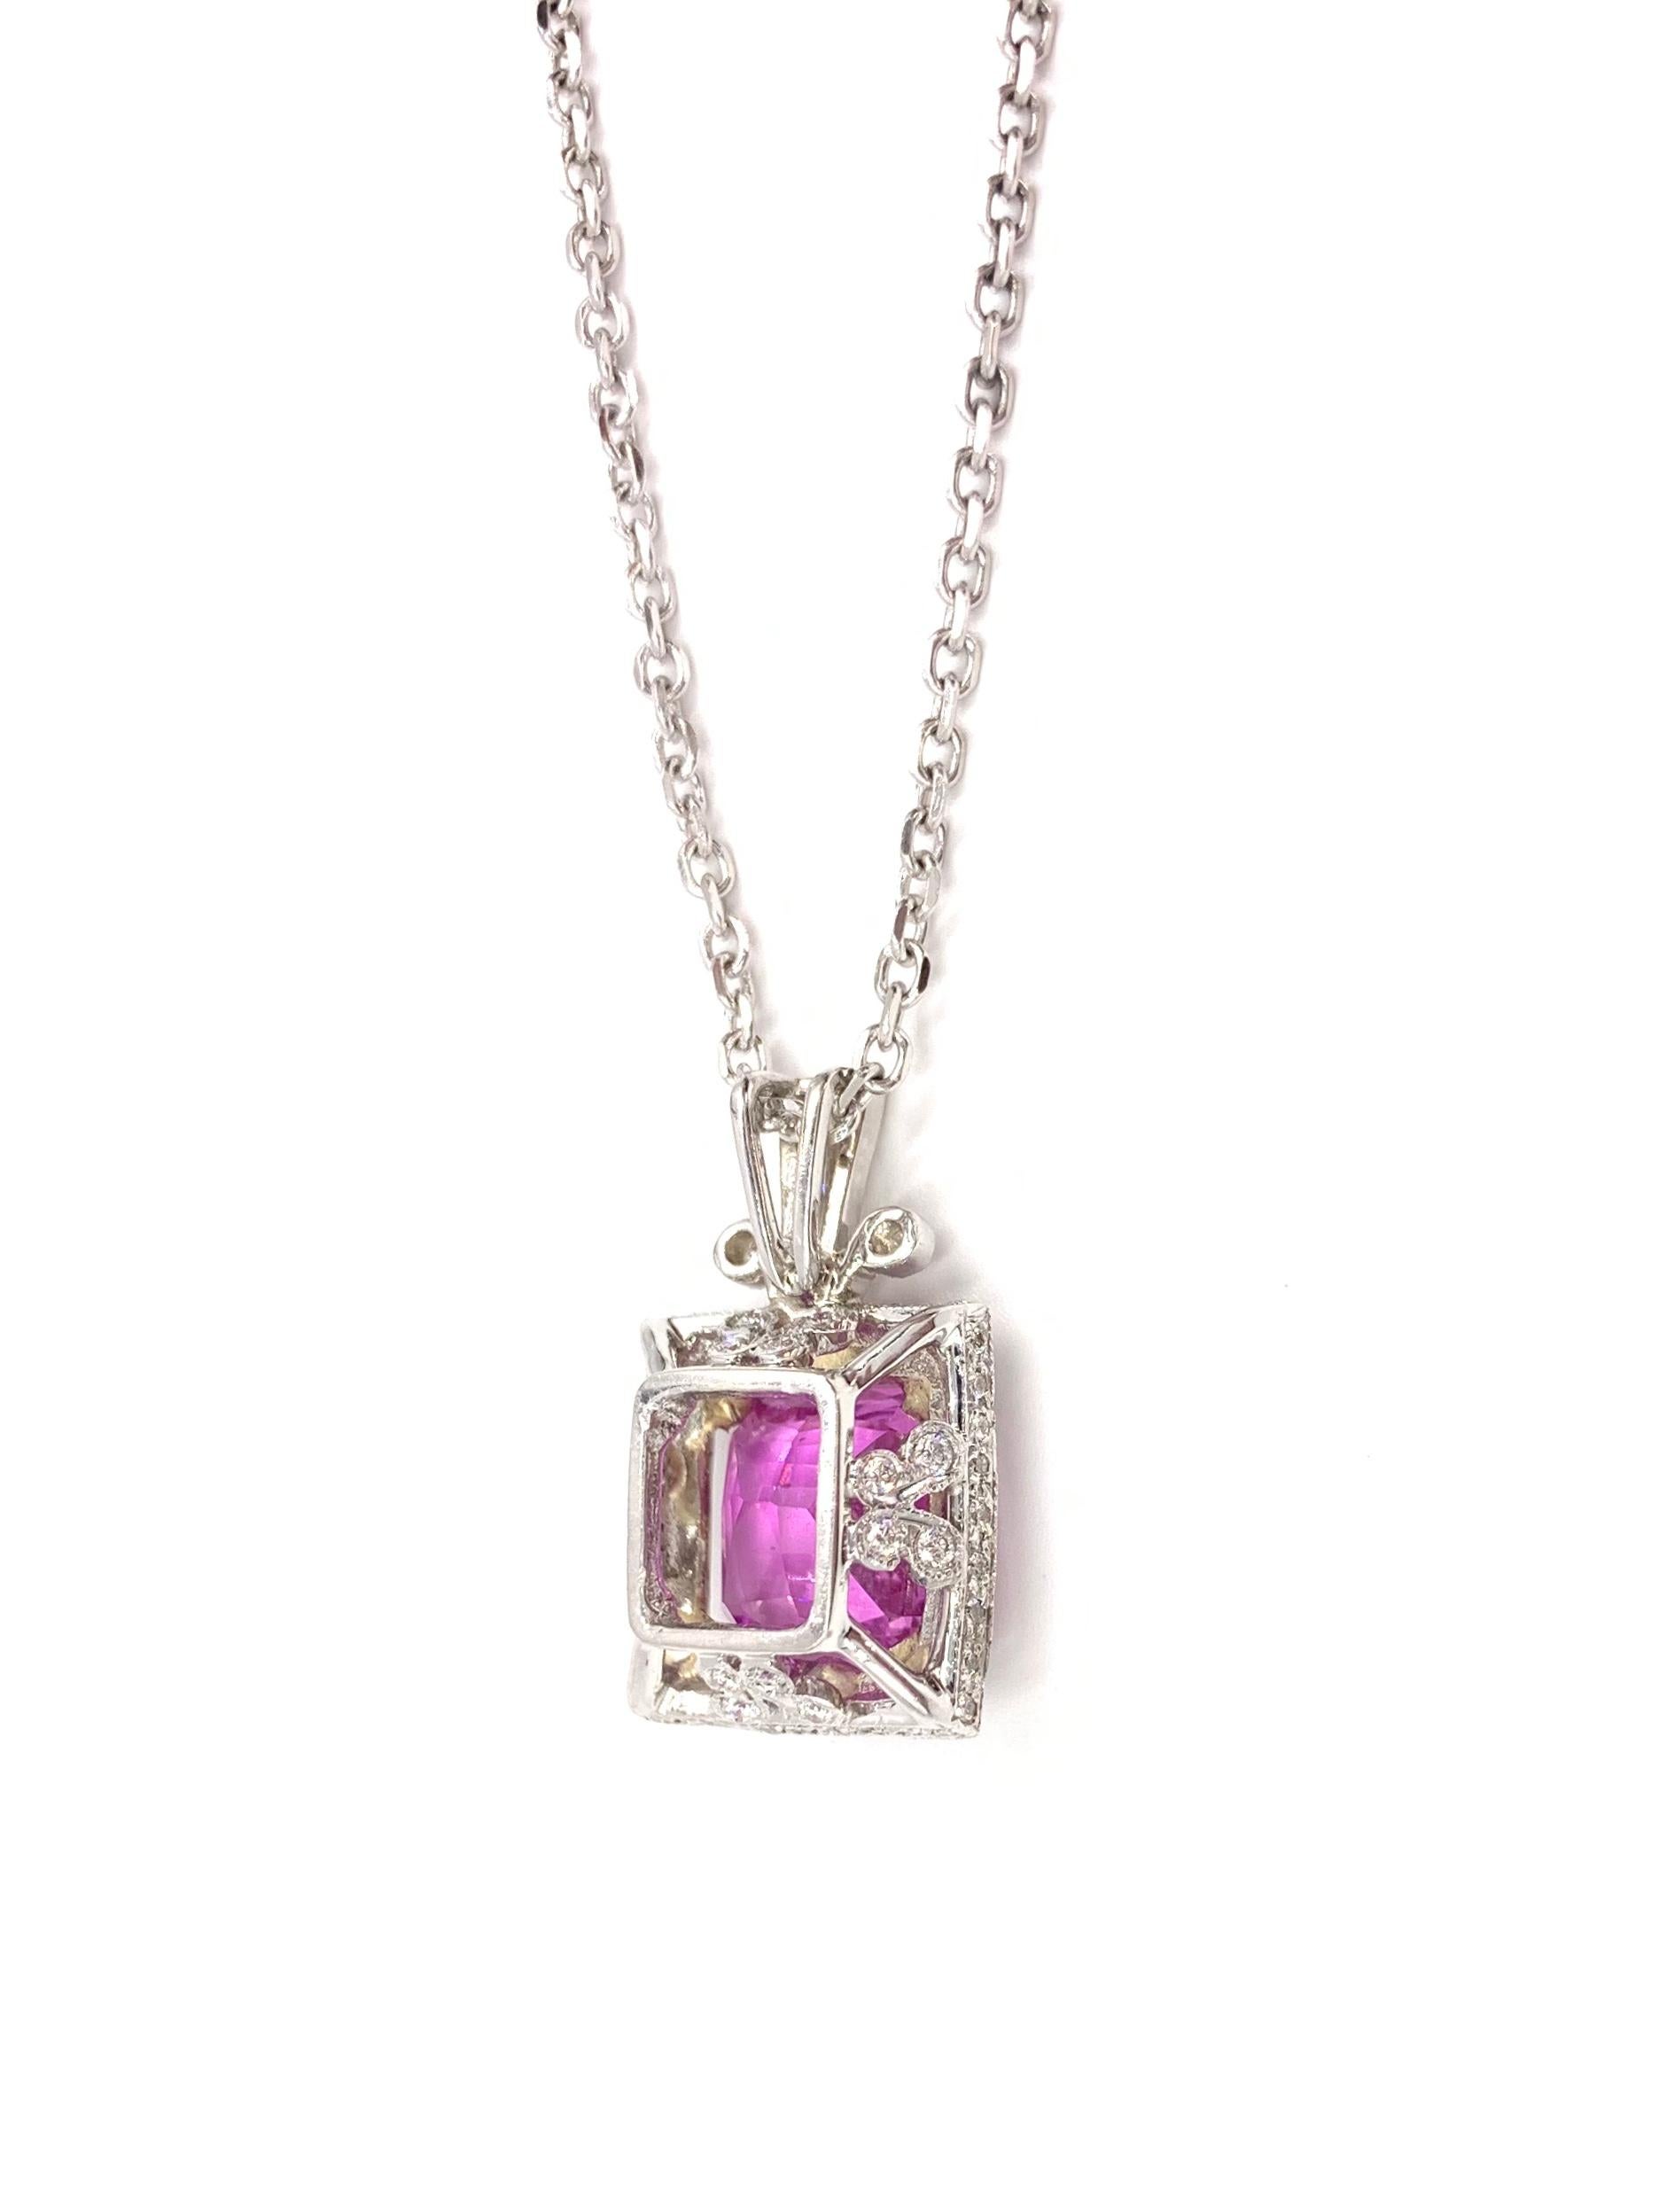 4.74 Carat Pink Sapphire and Diamond Pendant Necklace In Excellent Condition For Sale In Pikesville, MD